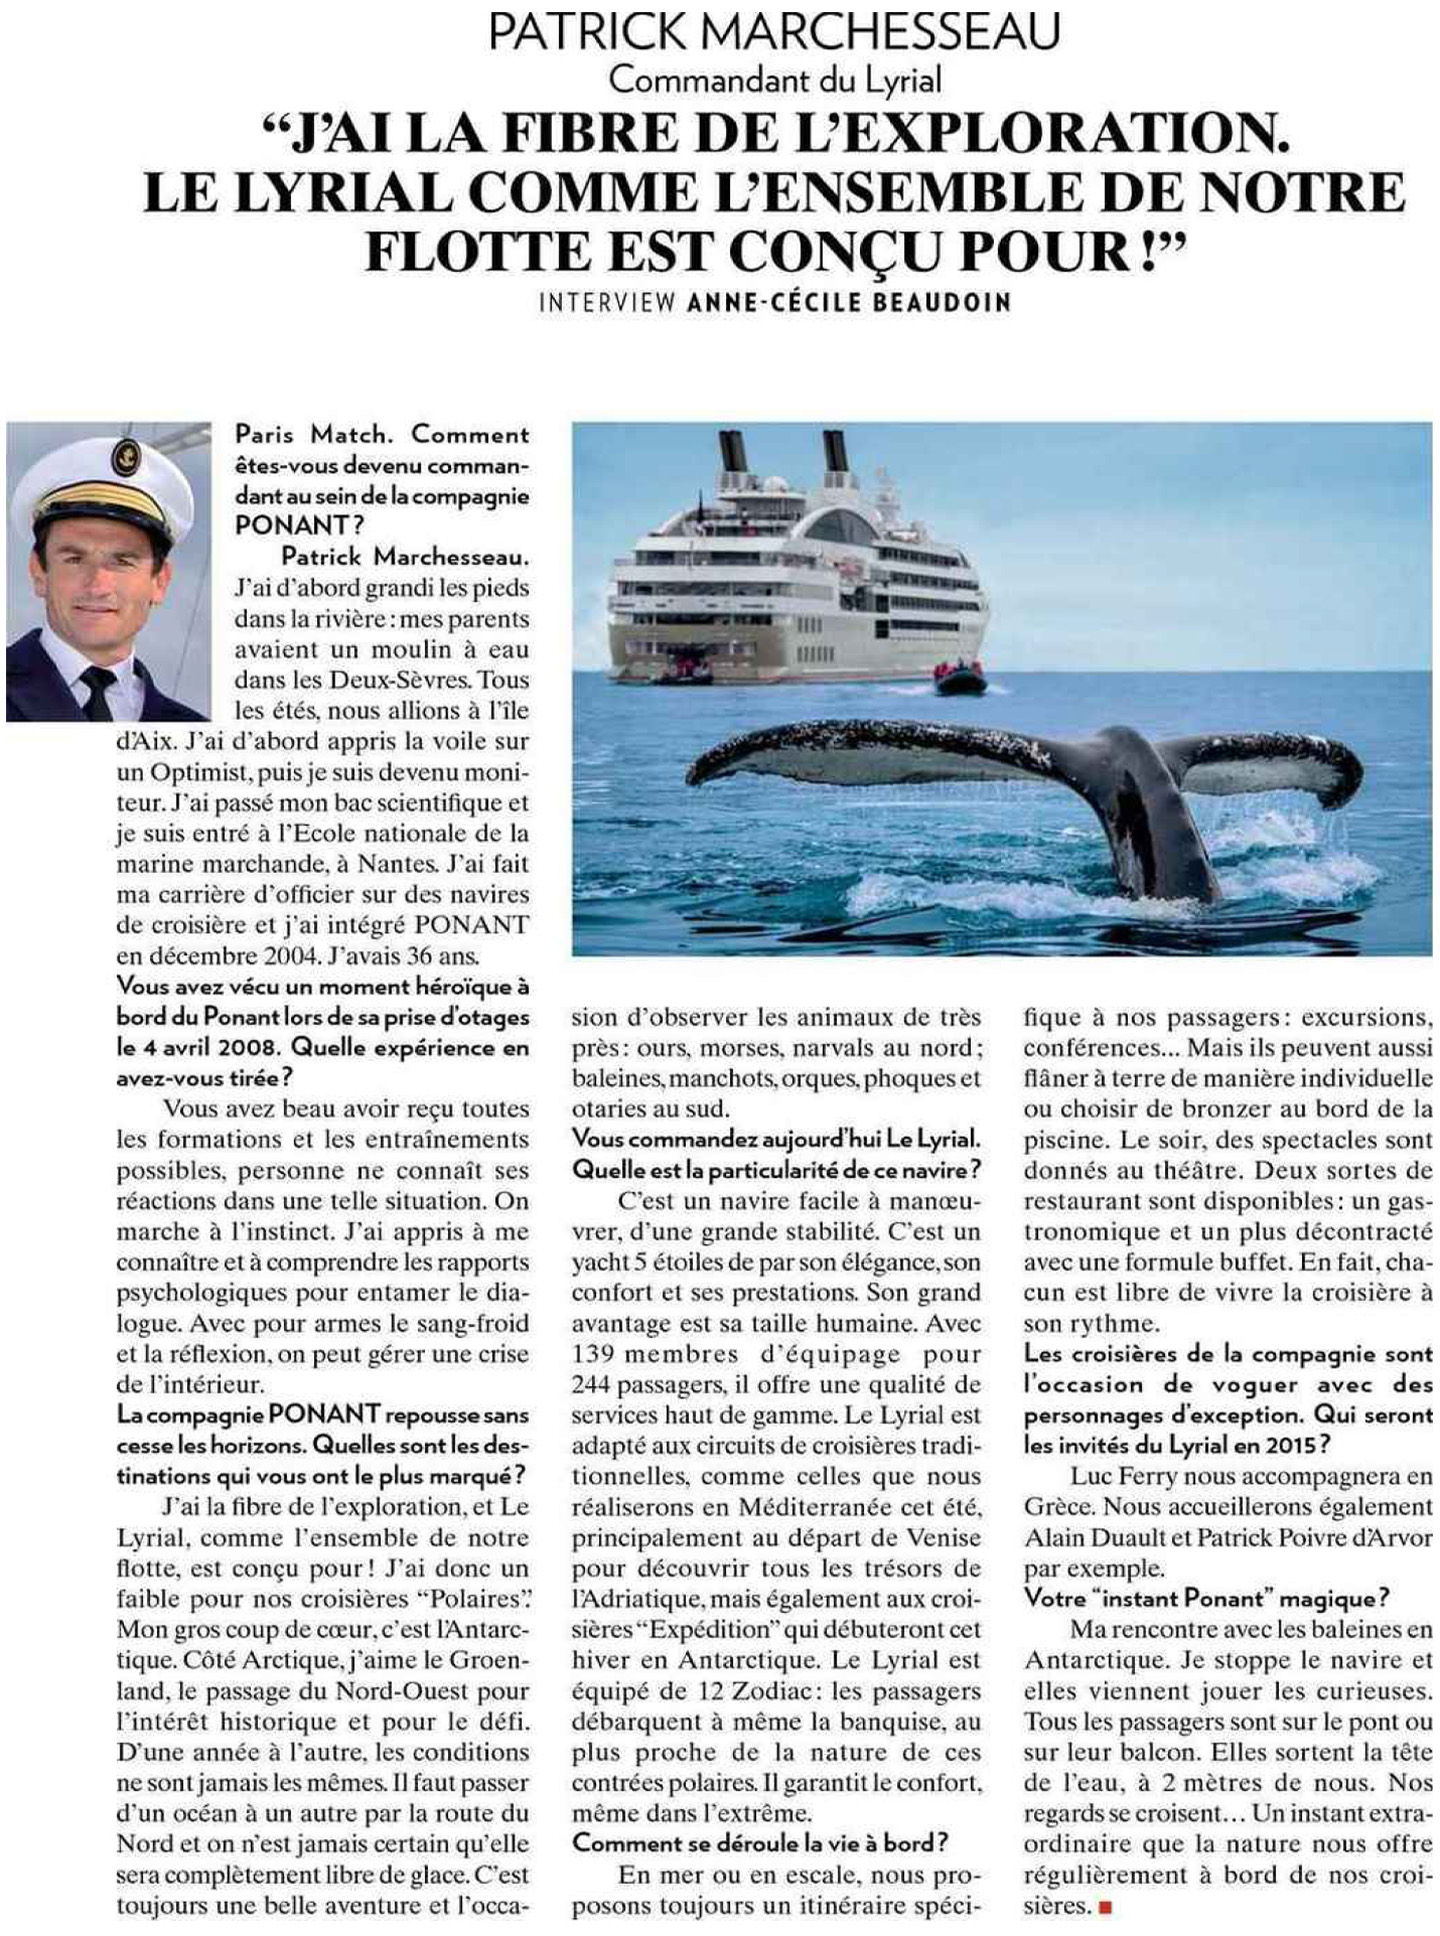 article on the lyrial de ponant in paris match magazine, a 5 star luxury hotel designed by the interior design studio jean-philippe nuel